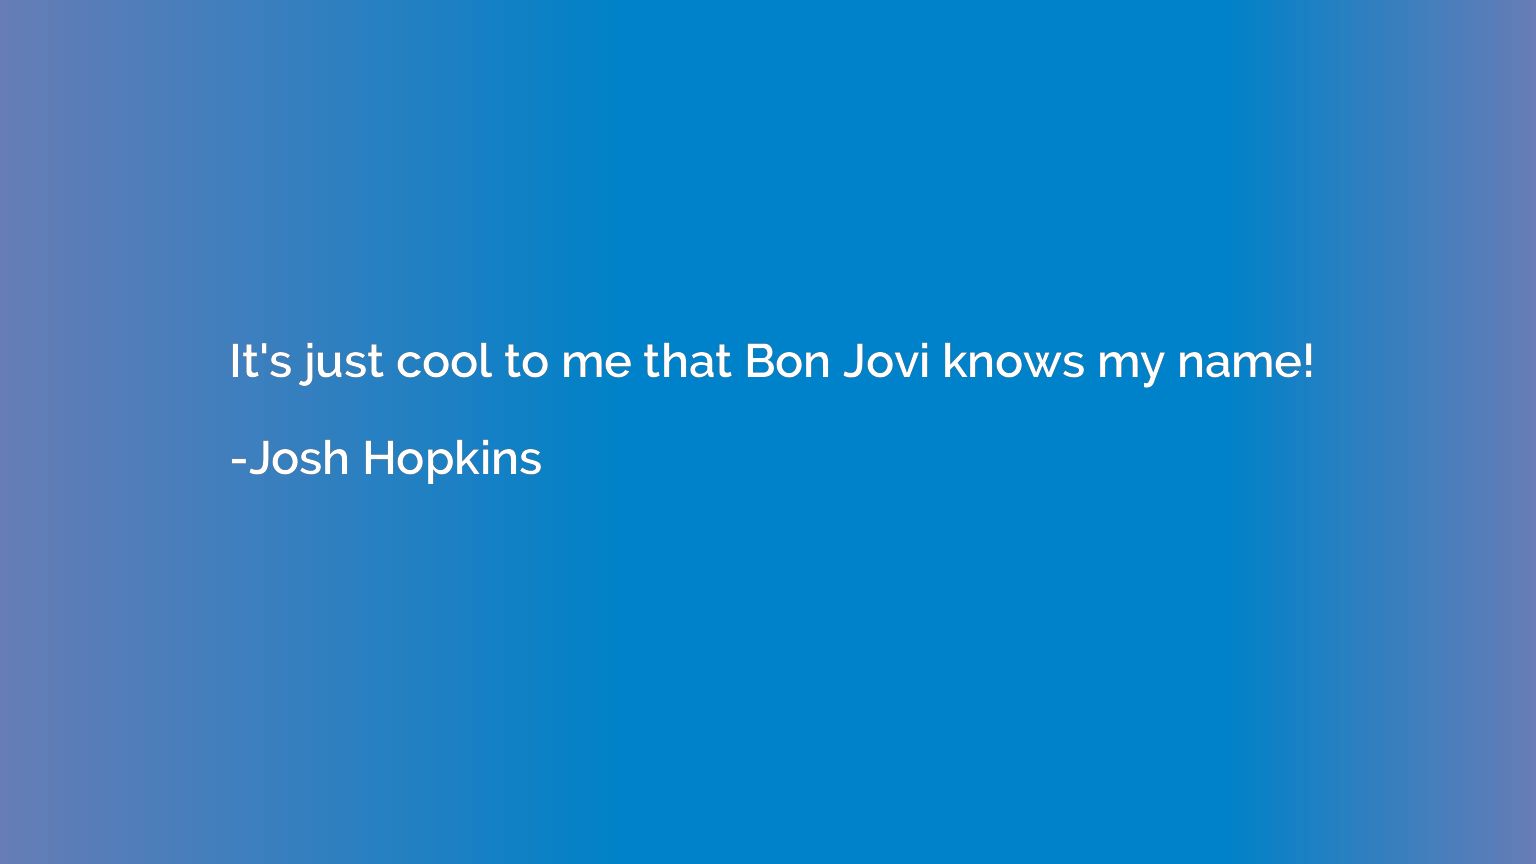 It's just cool to me that Bon Jovi knows my name!